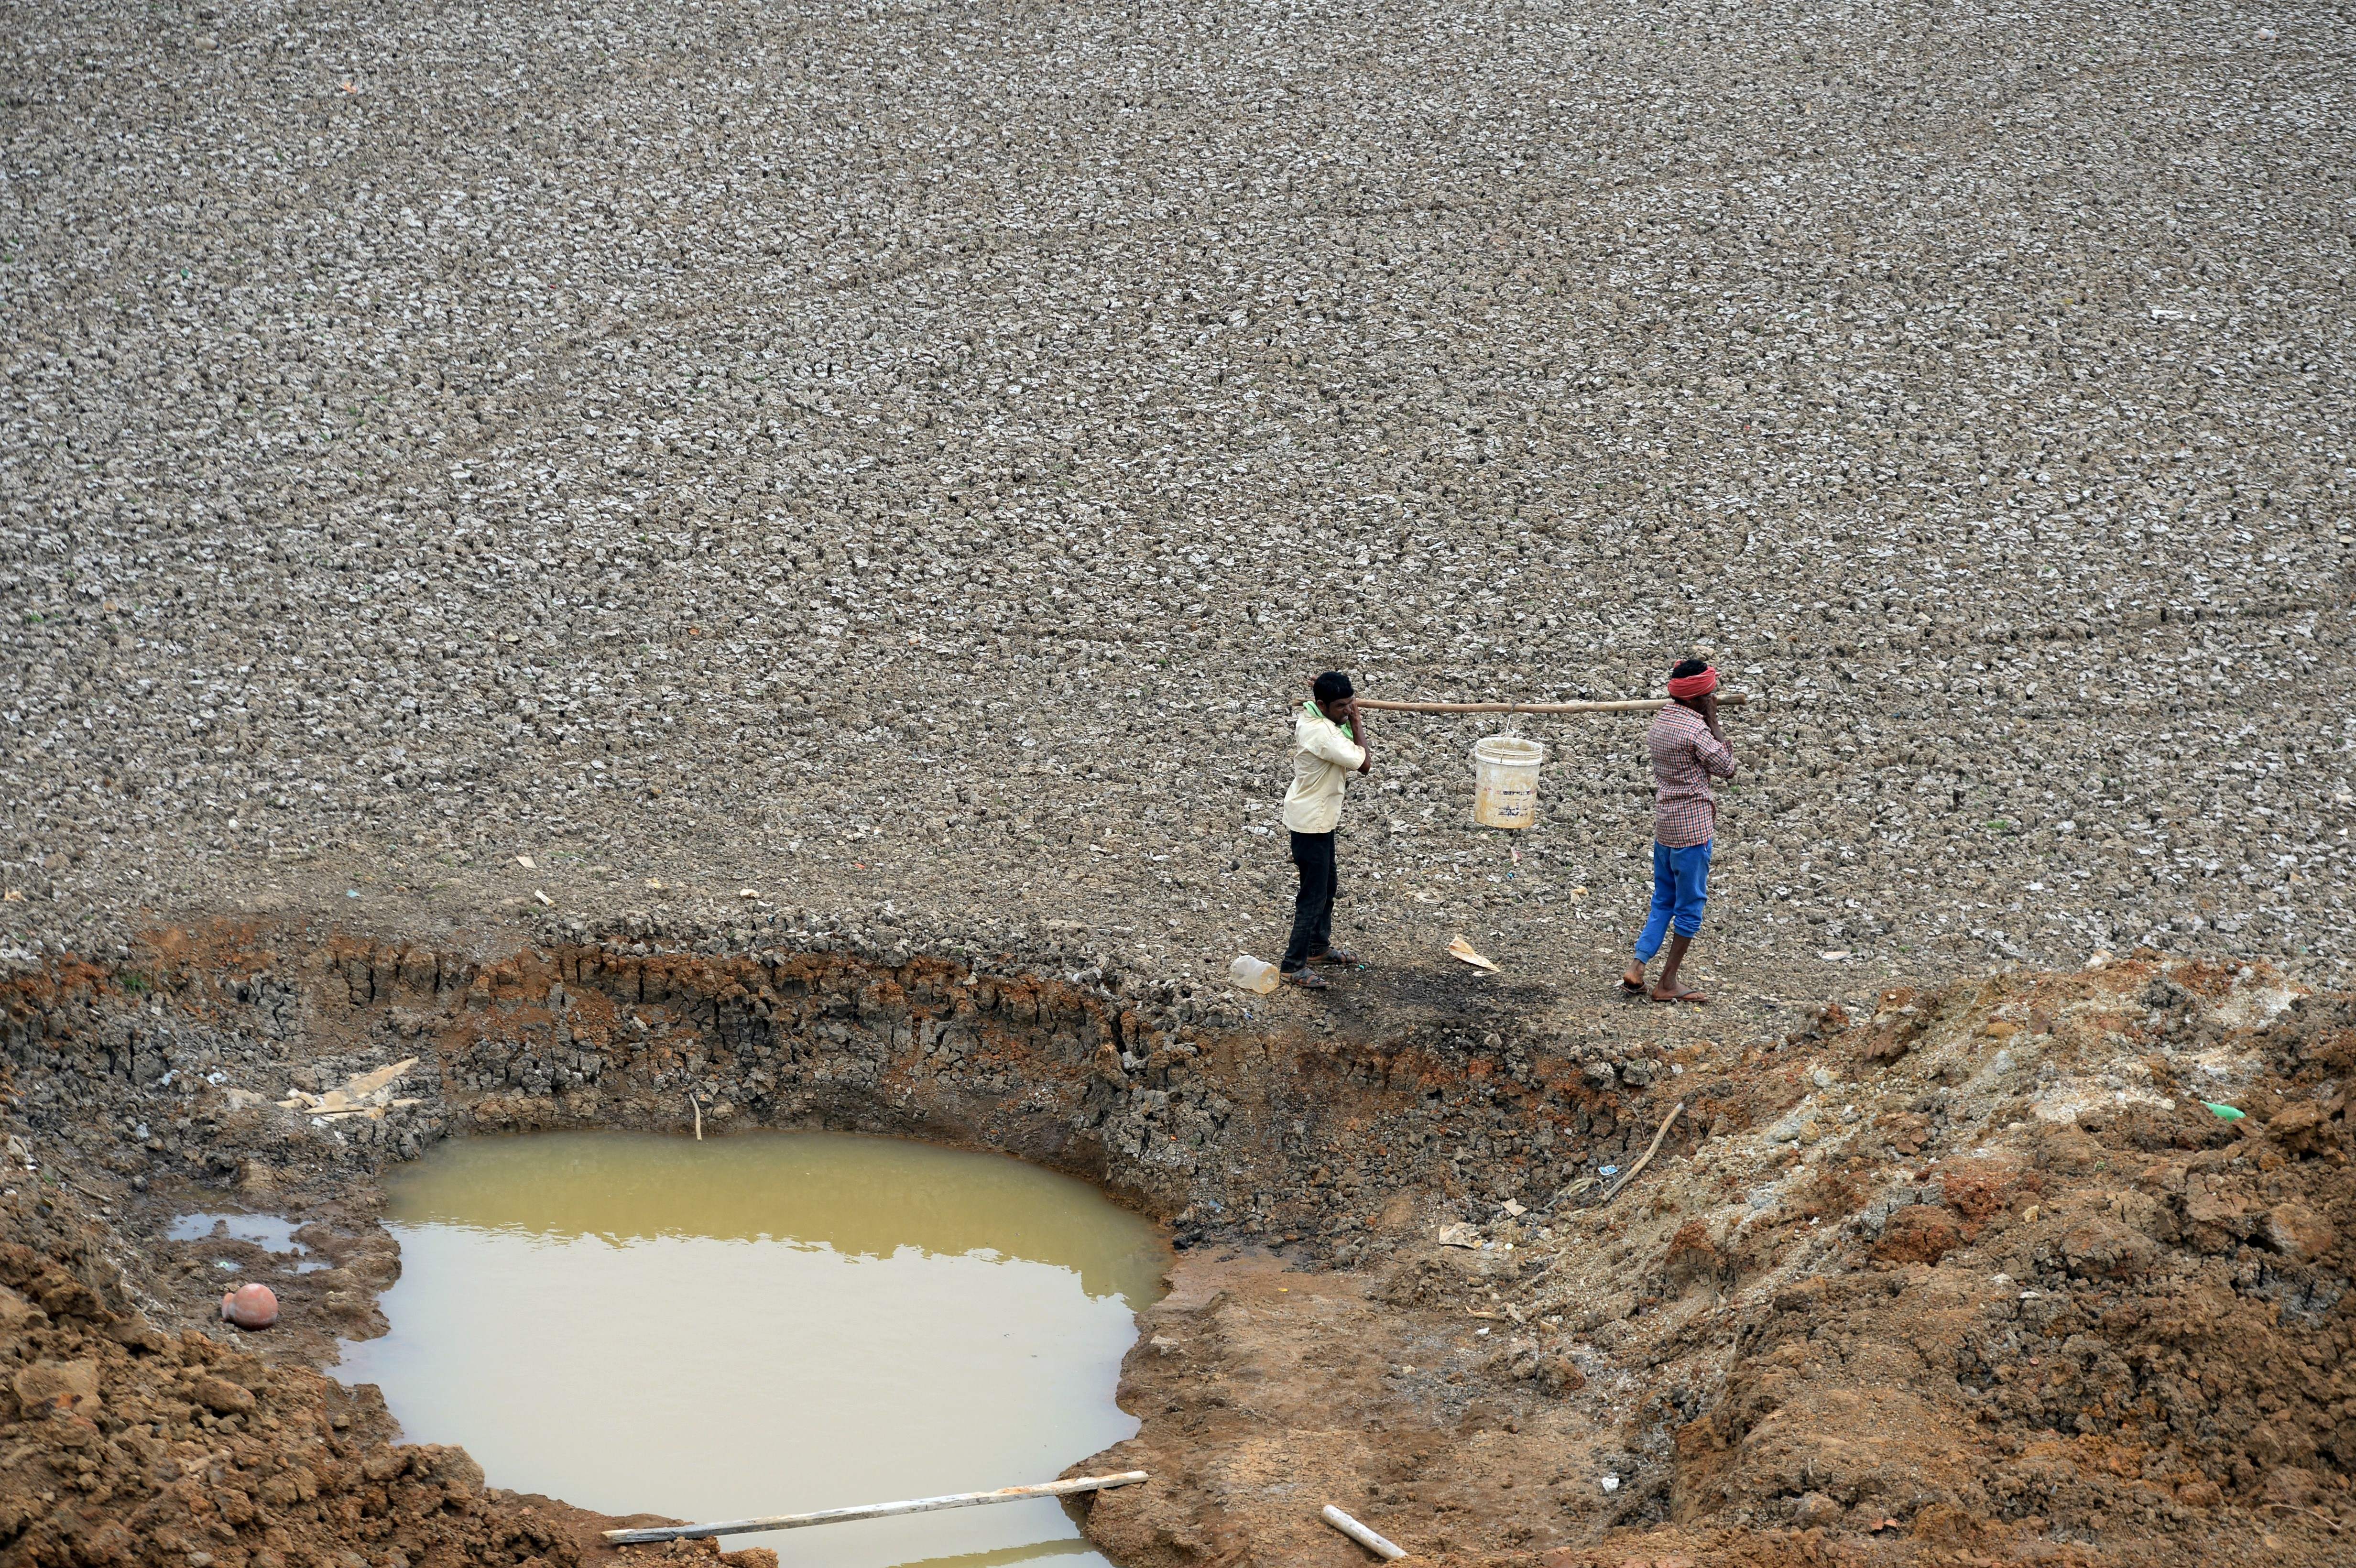 Indian workers carry the last bit of water from a small pond on the outskirts of Chennai during Tamil Nadu’s worst drought in 2019